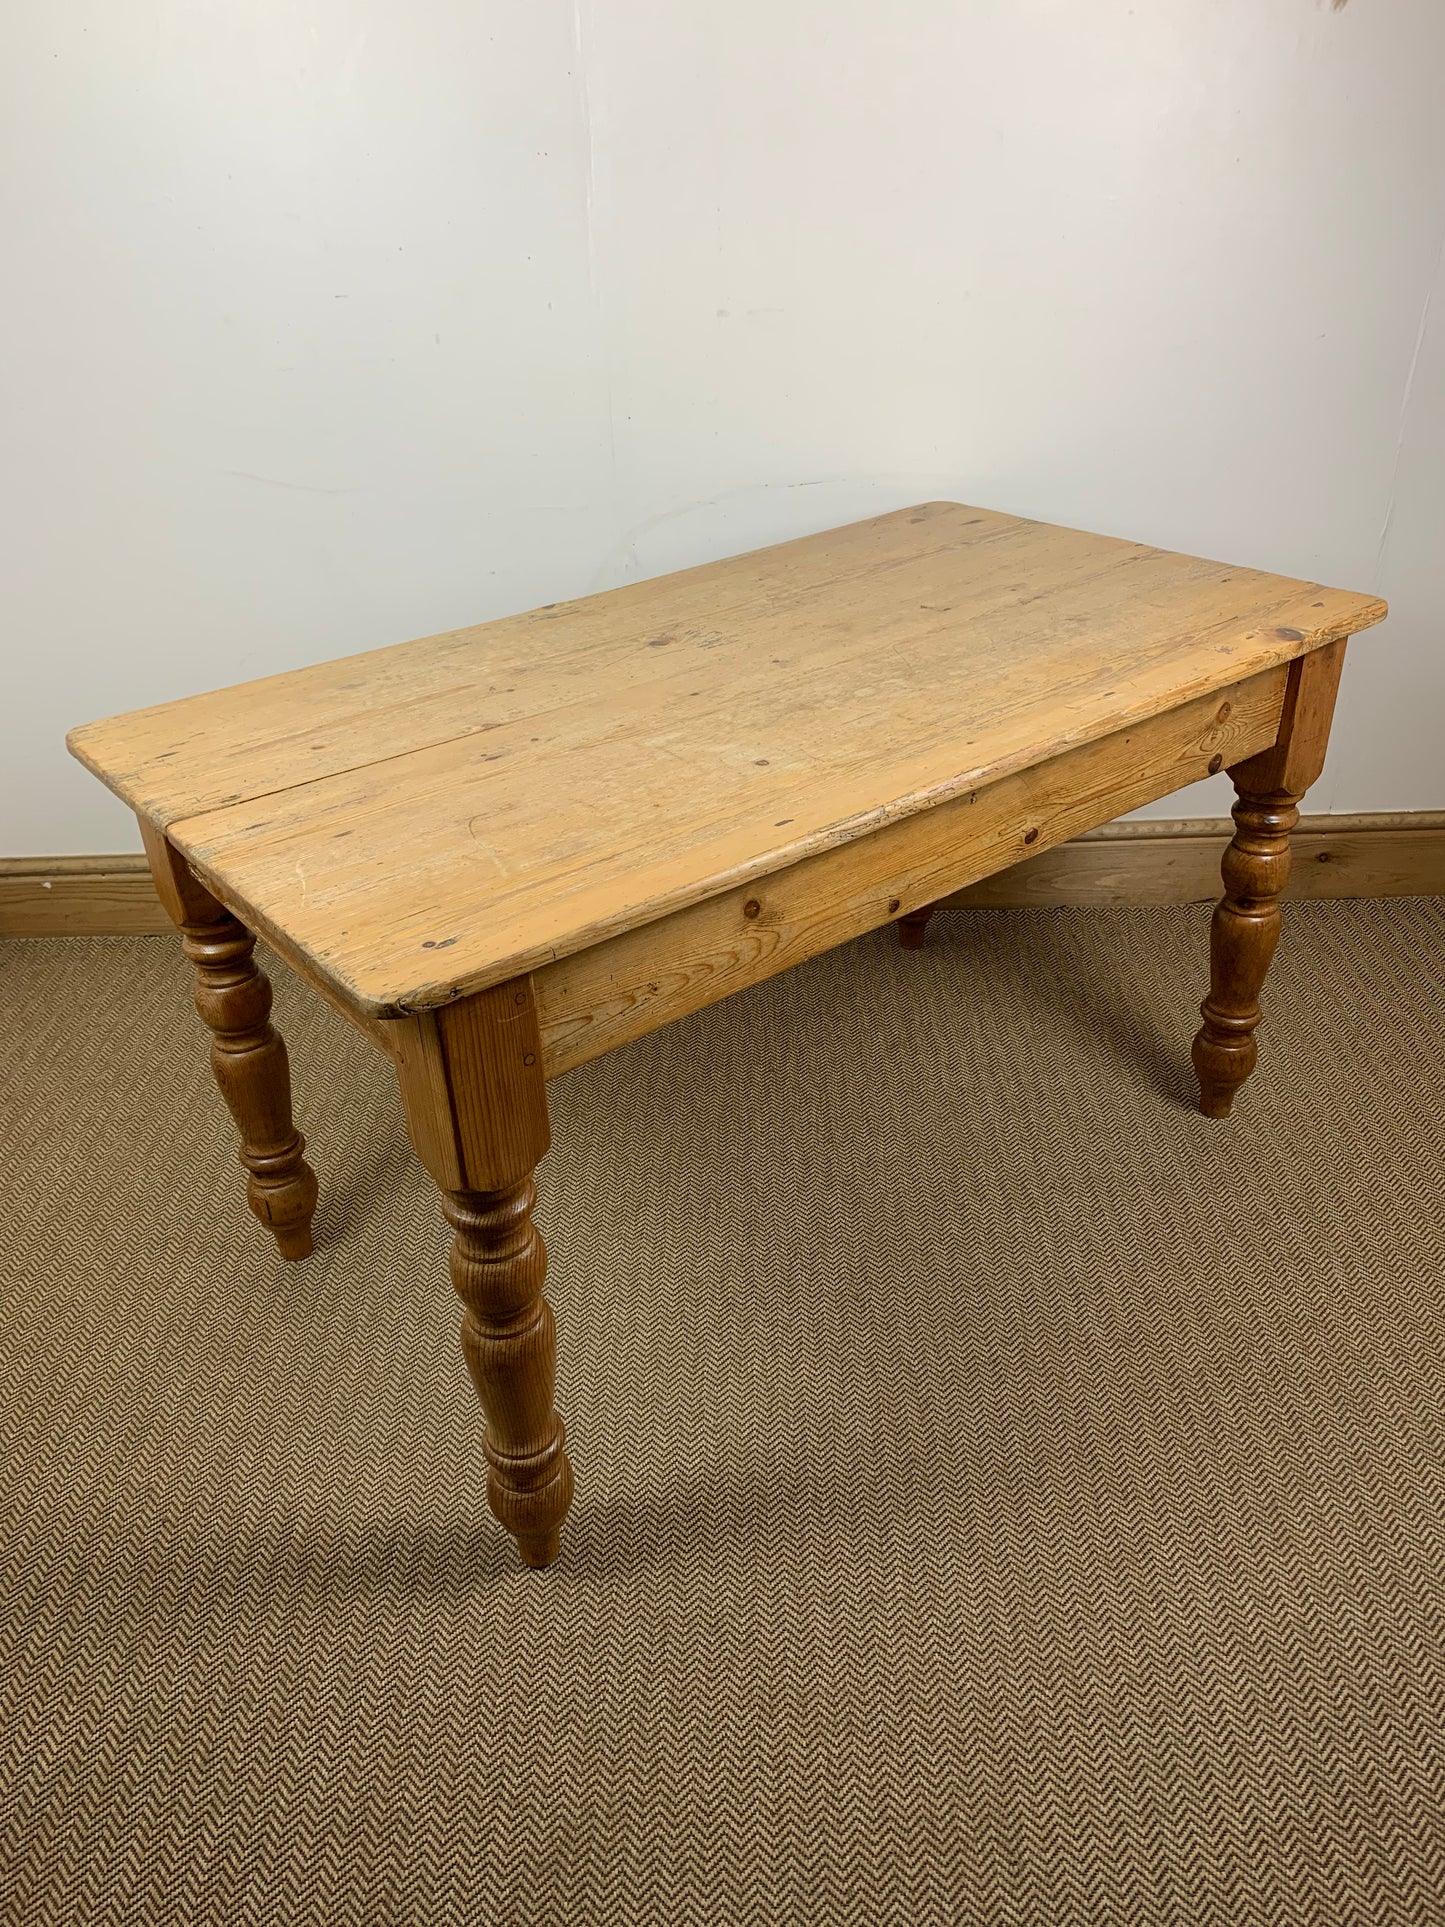 Victorian Pine Table - Vintage Elegance for Your Home